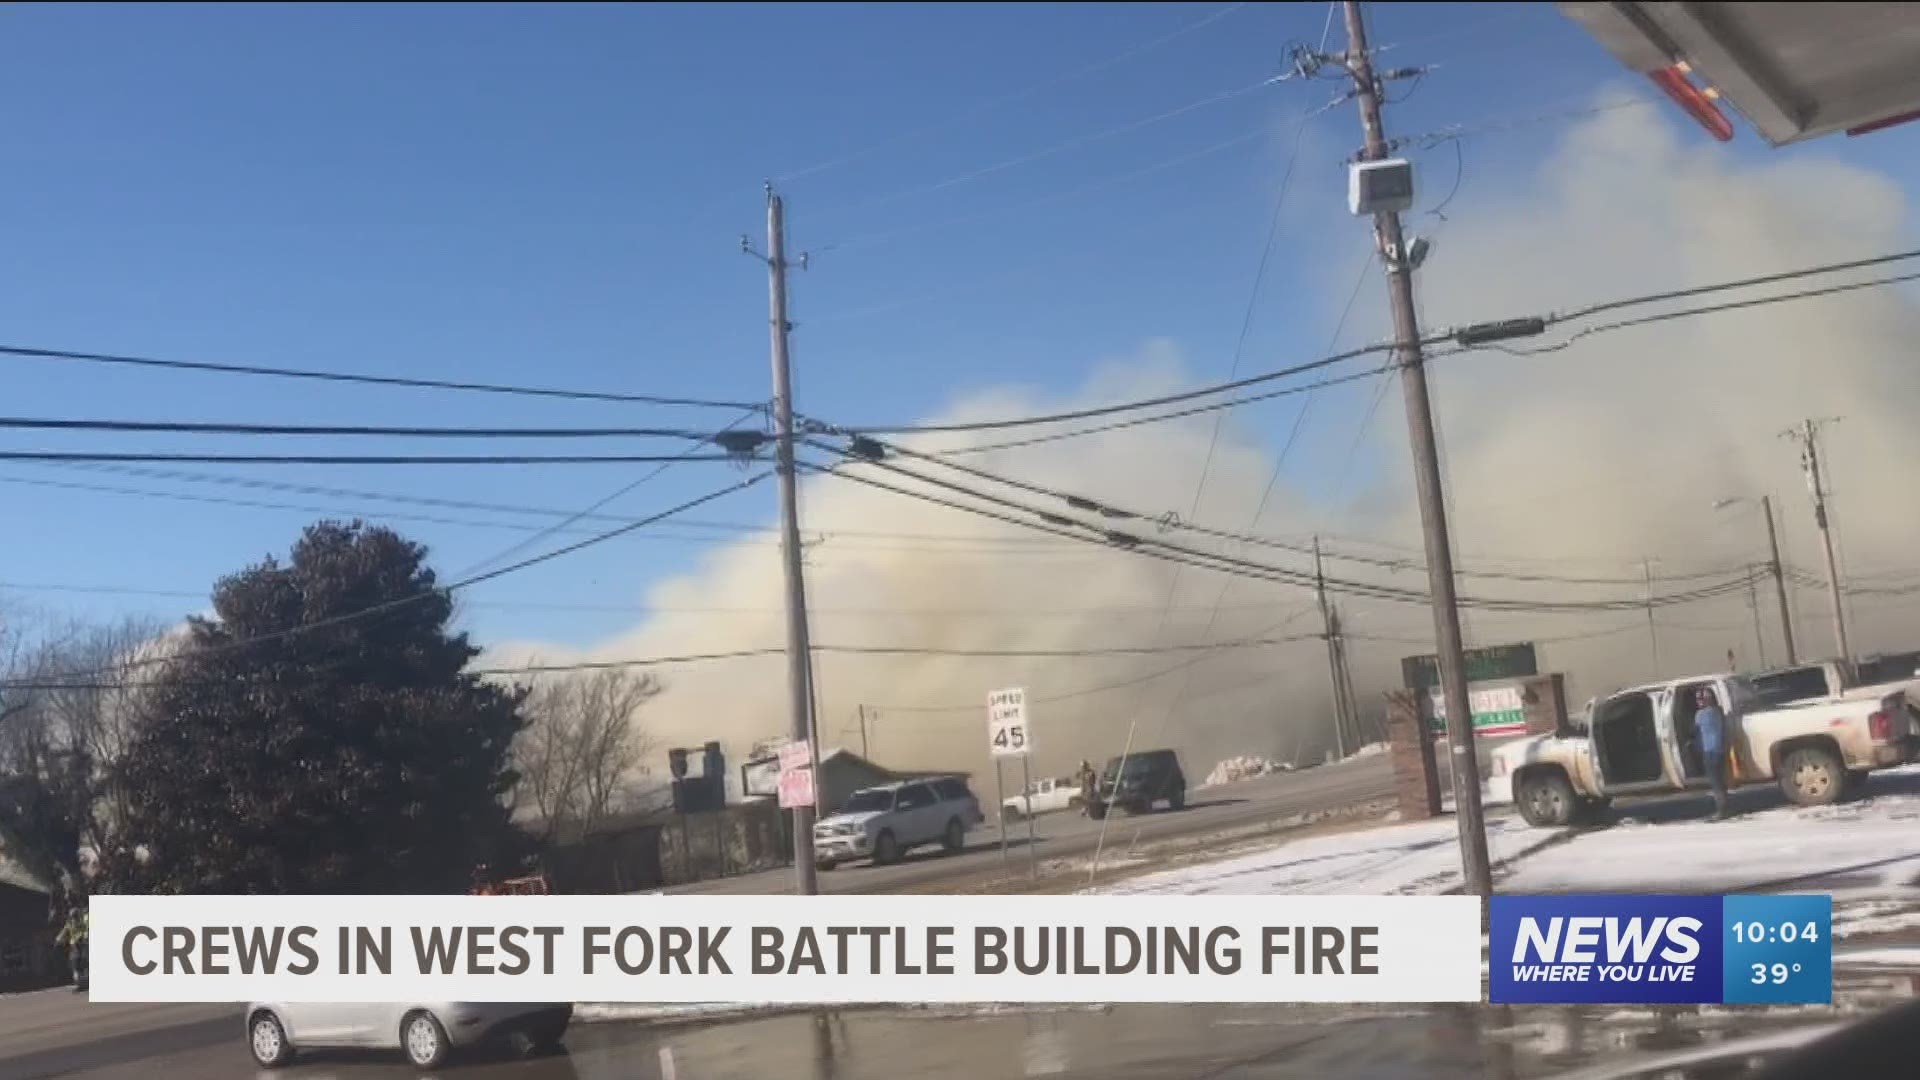 The West Fork fire department responded to a structure fire on Highway 71 in West Fork Saturday (Feb. 20) afternoon.